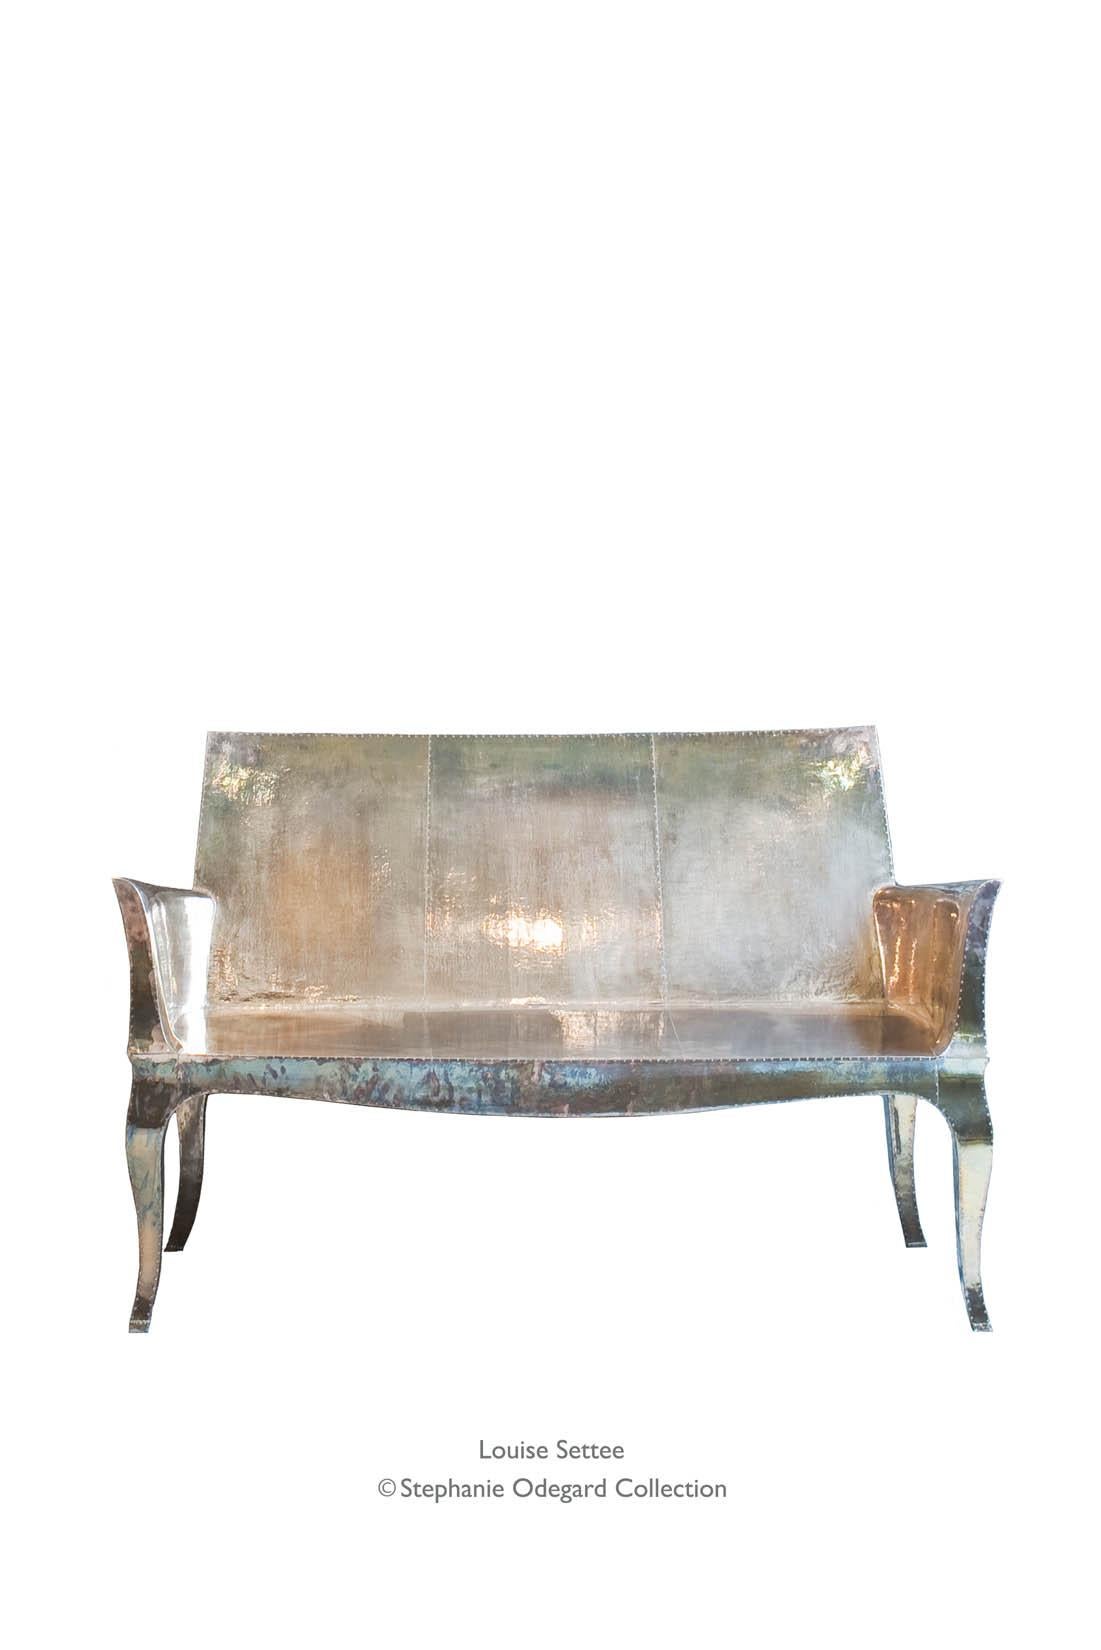 Louise Settee Art Deco Loveseats in Fine Hammered Antique Bronze For Sale 6